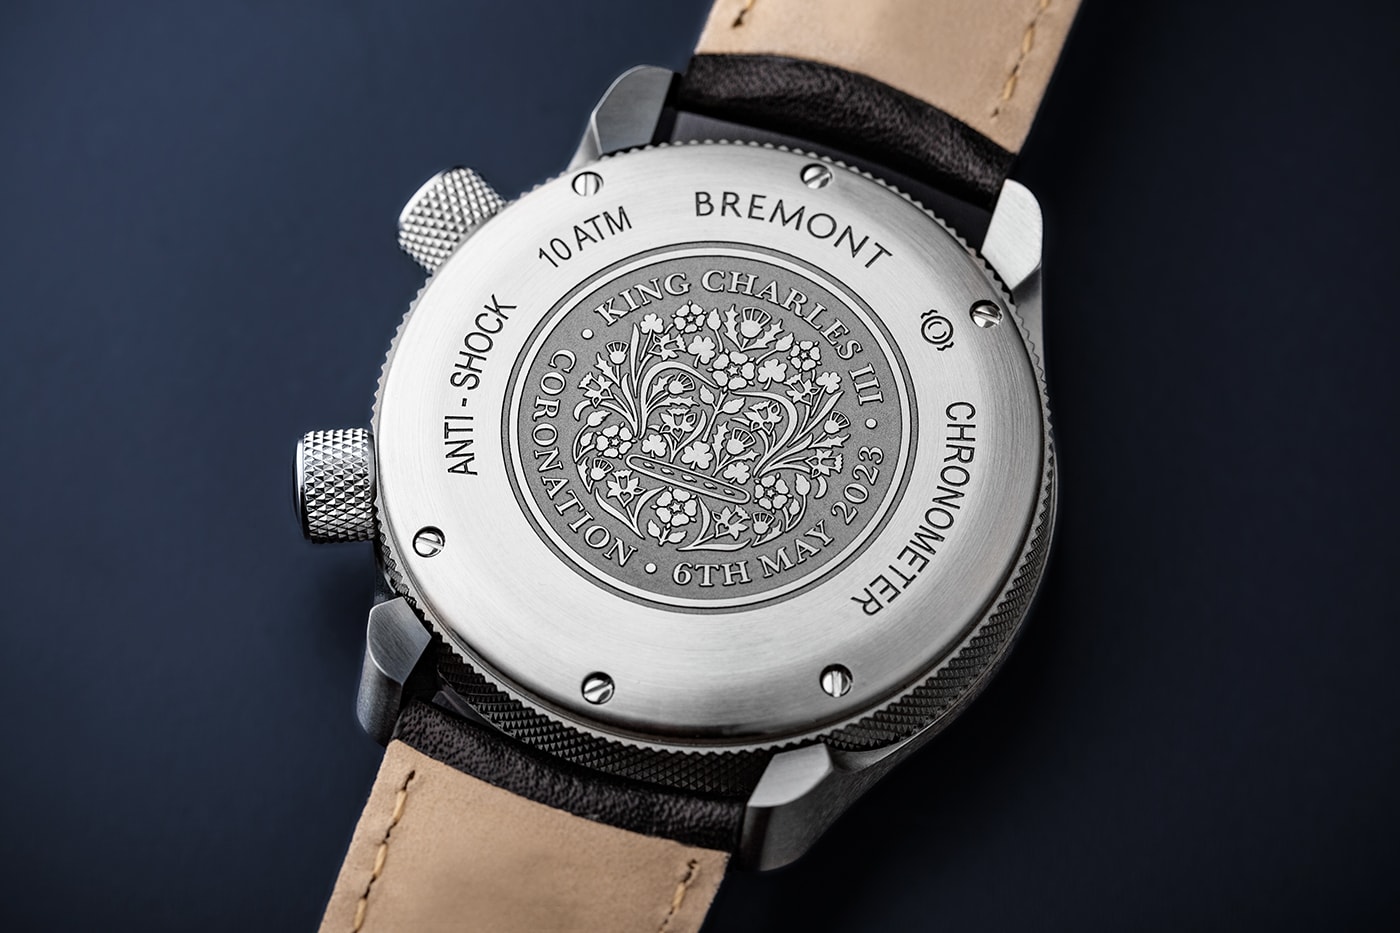 Bremont MBII King Charles III Limited-Edition Commemorative Timepiece Release Info